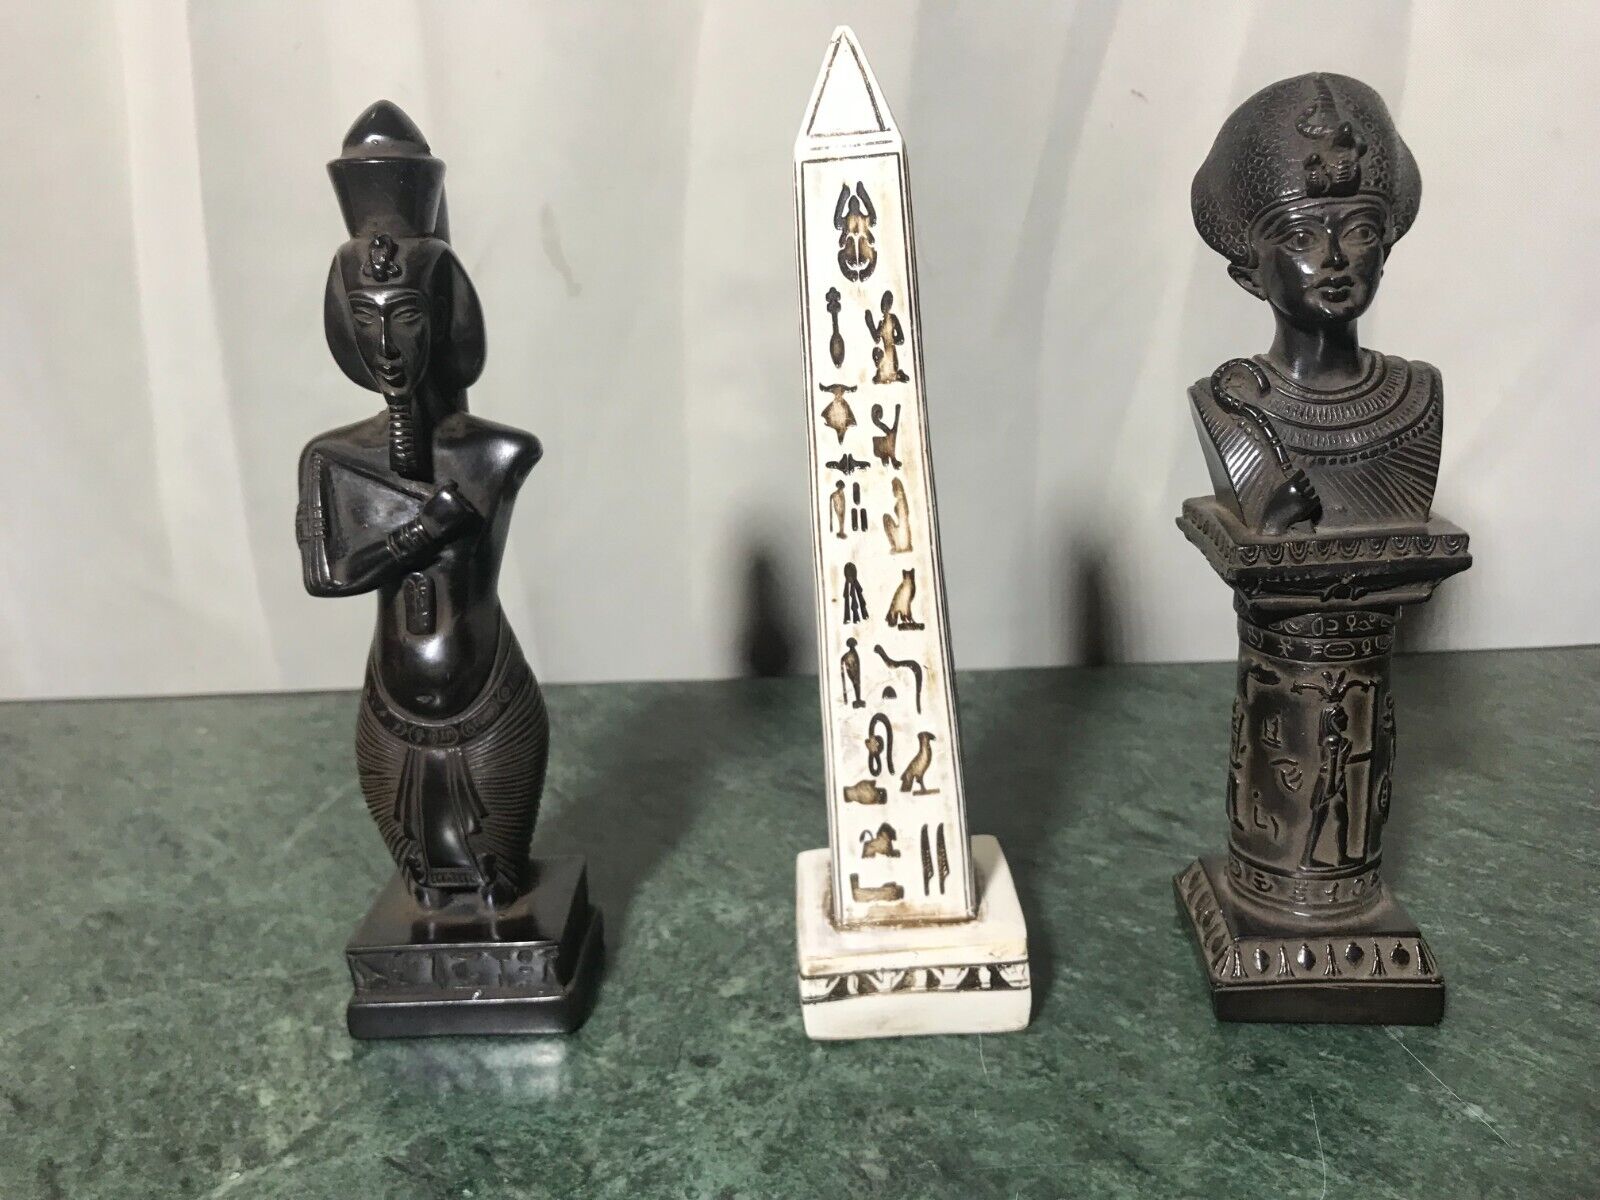 3 in 1 unique statues of Akhenaten and the ancient Pharaonic obelisk BC